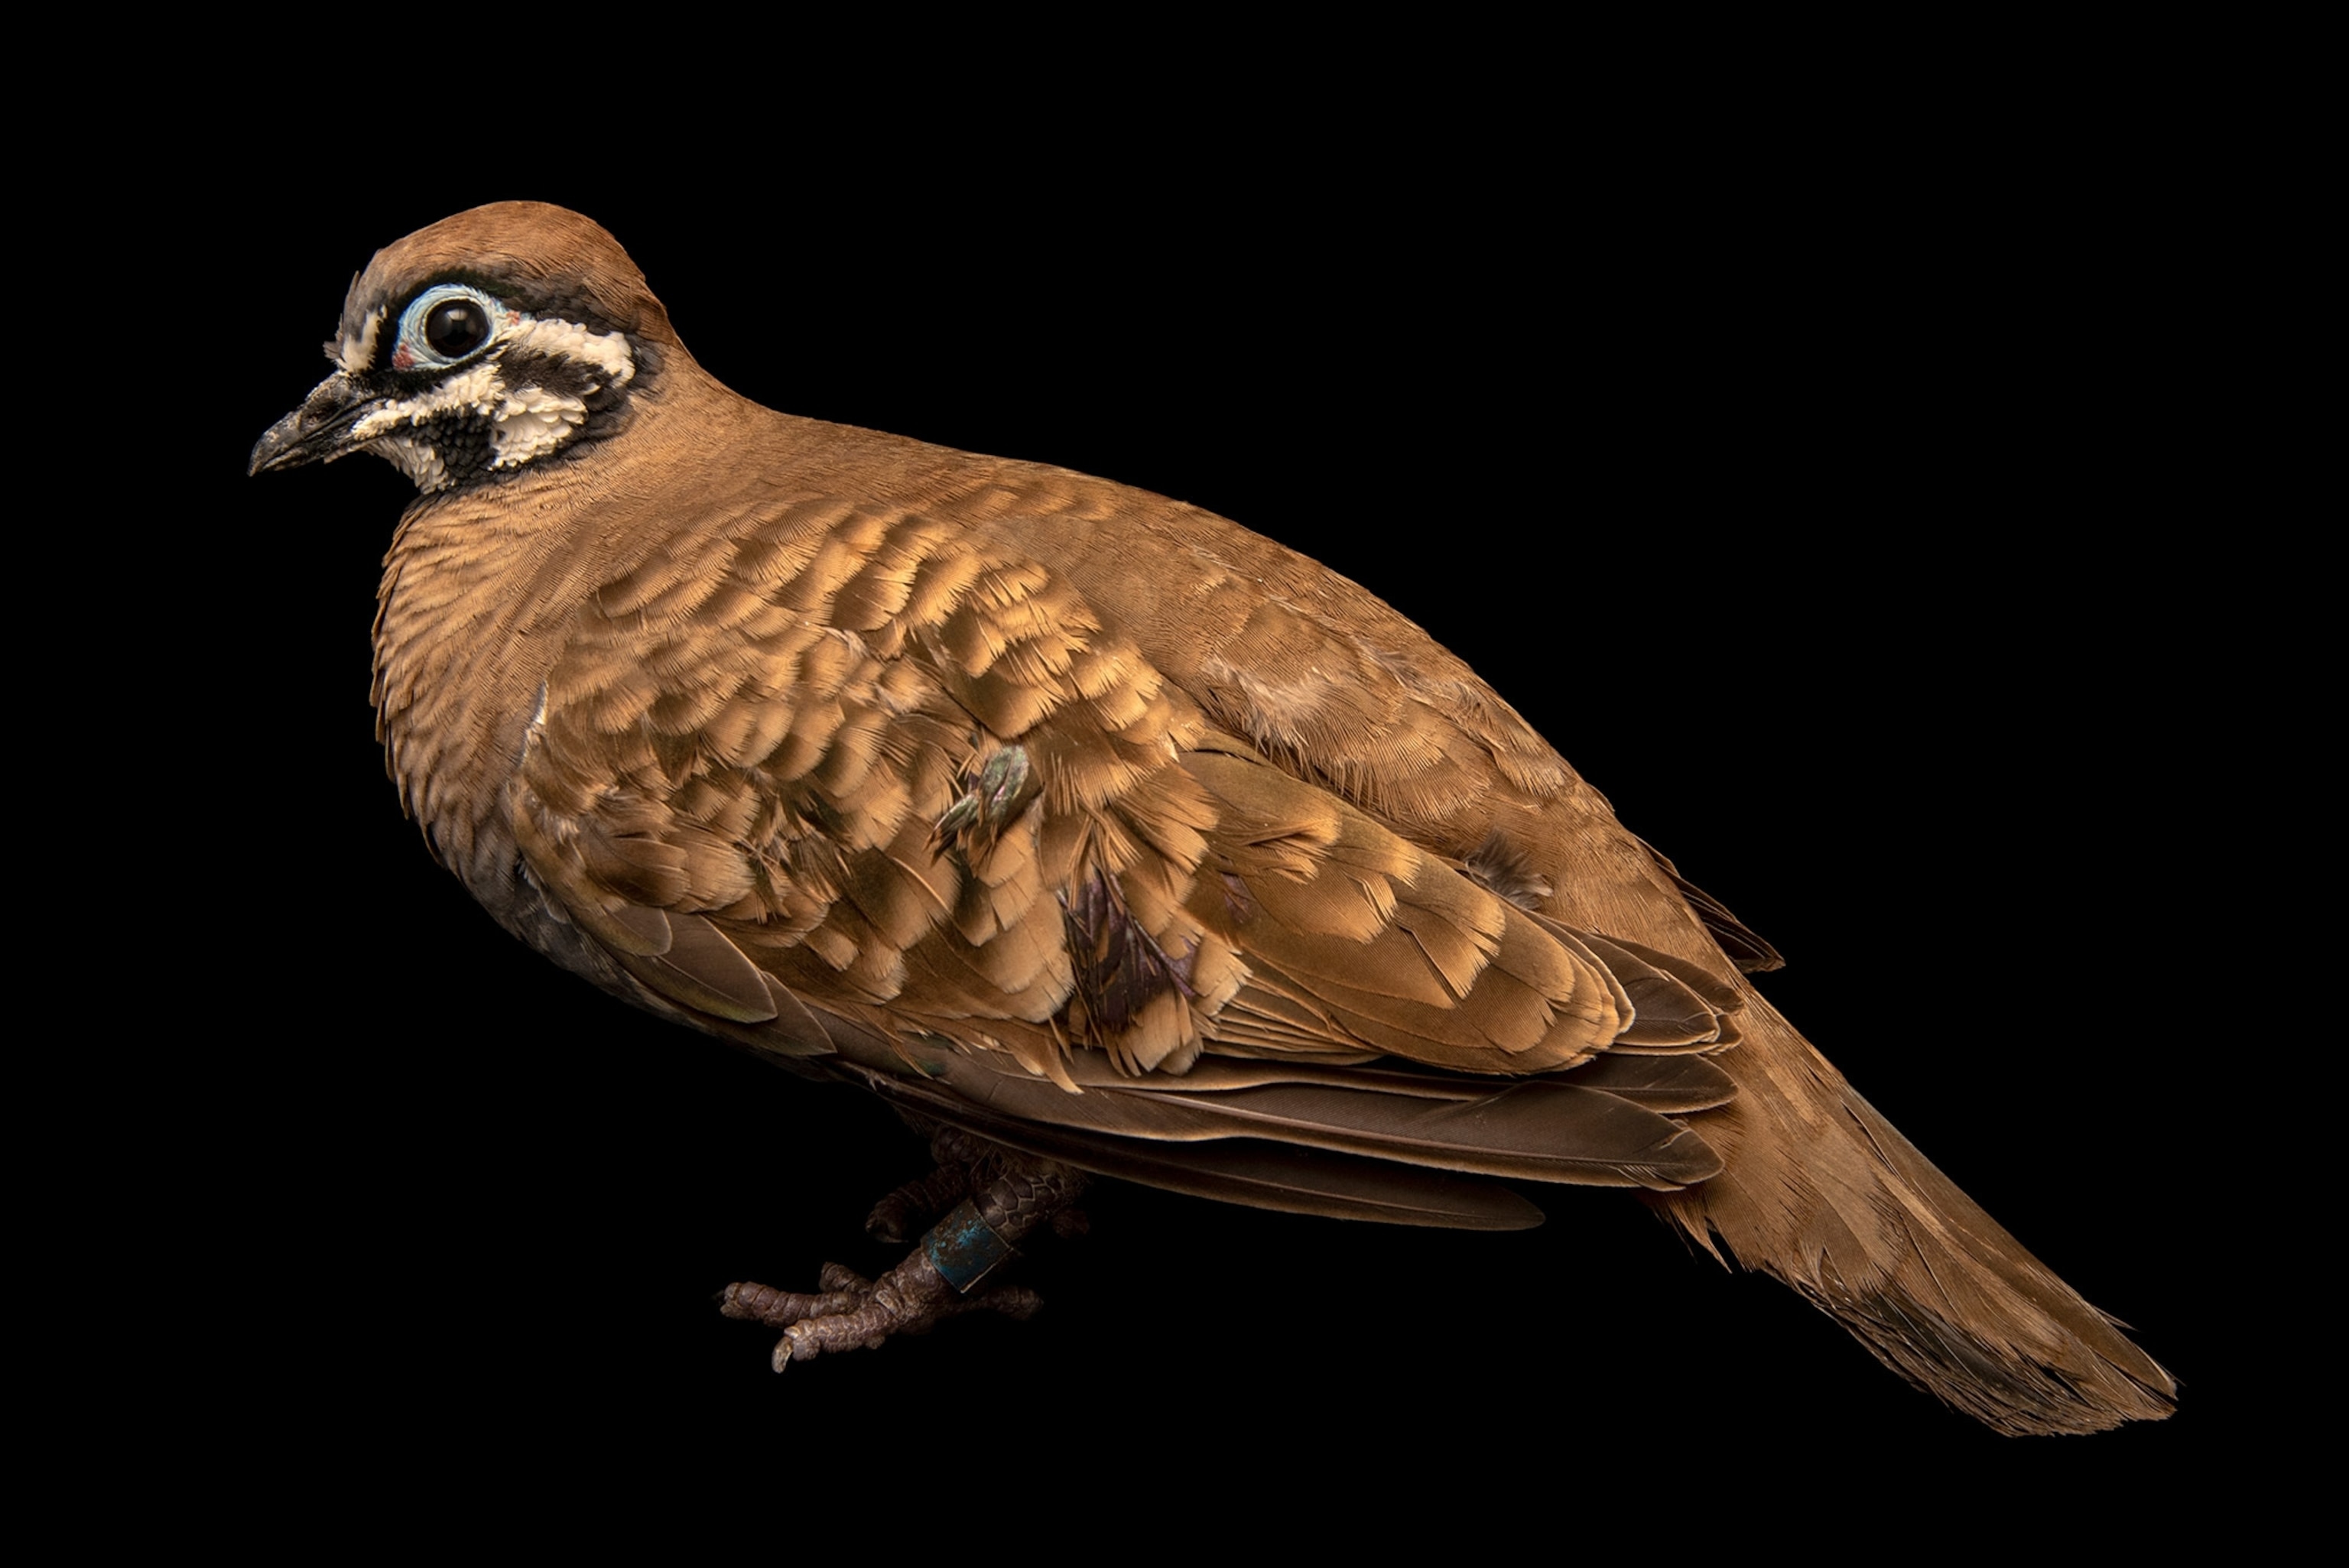 Studio photograph of a squatter pigeon